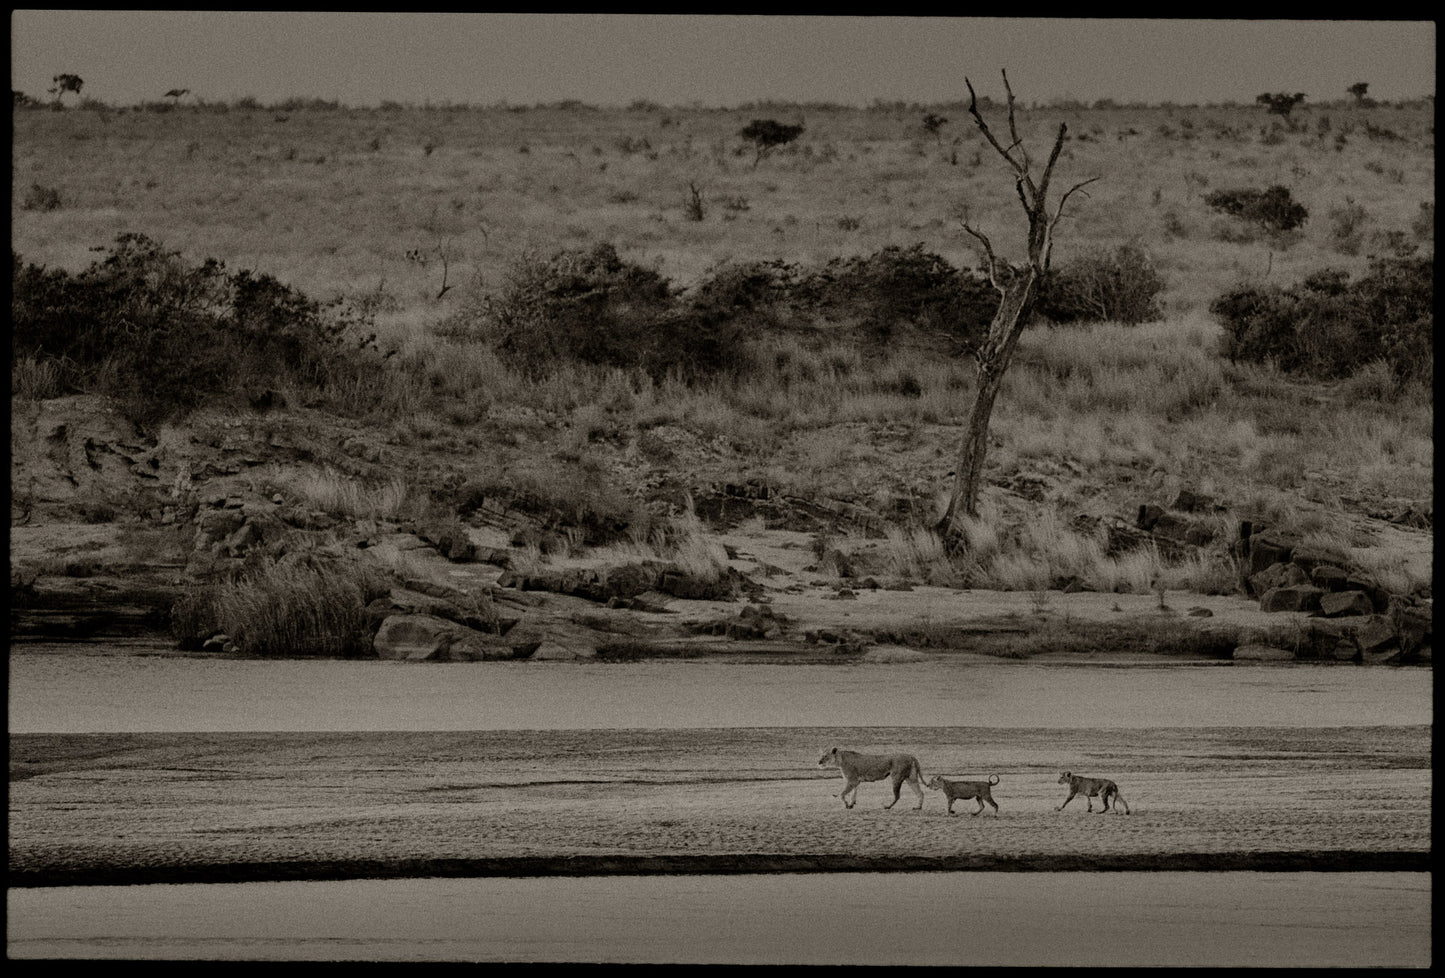 Lioness with Cubs Along The River